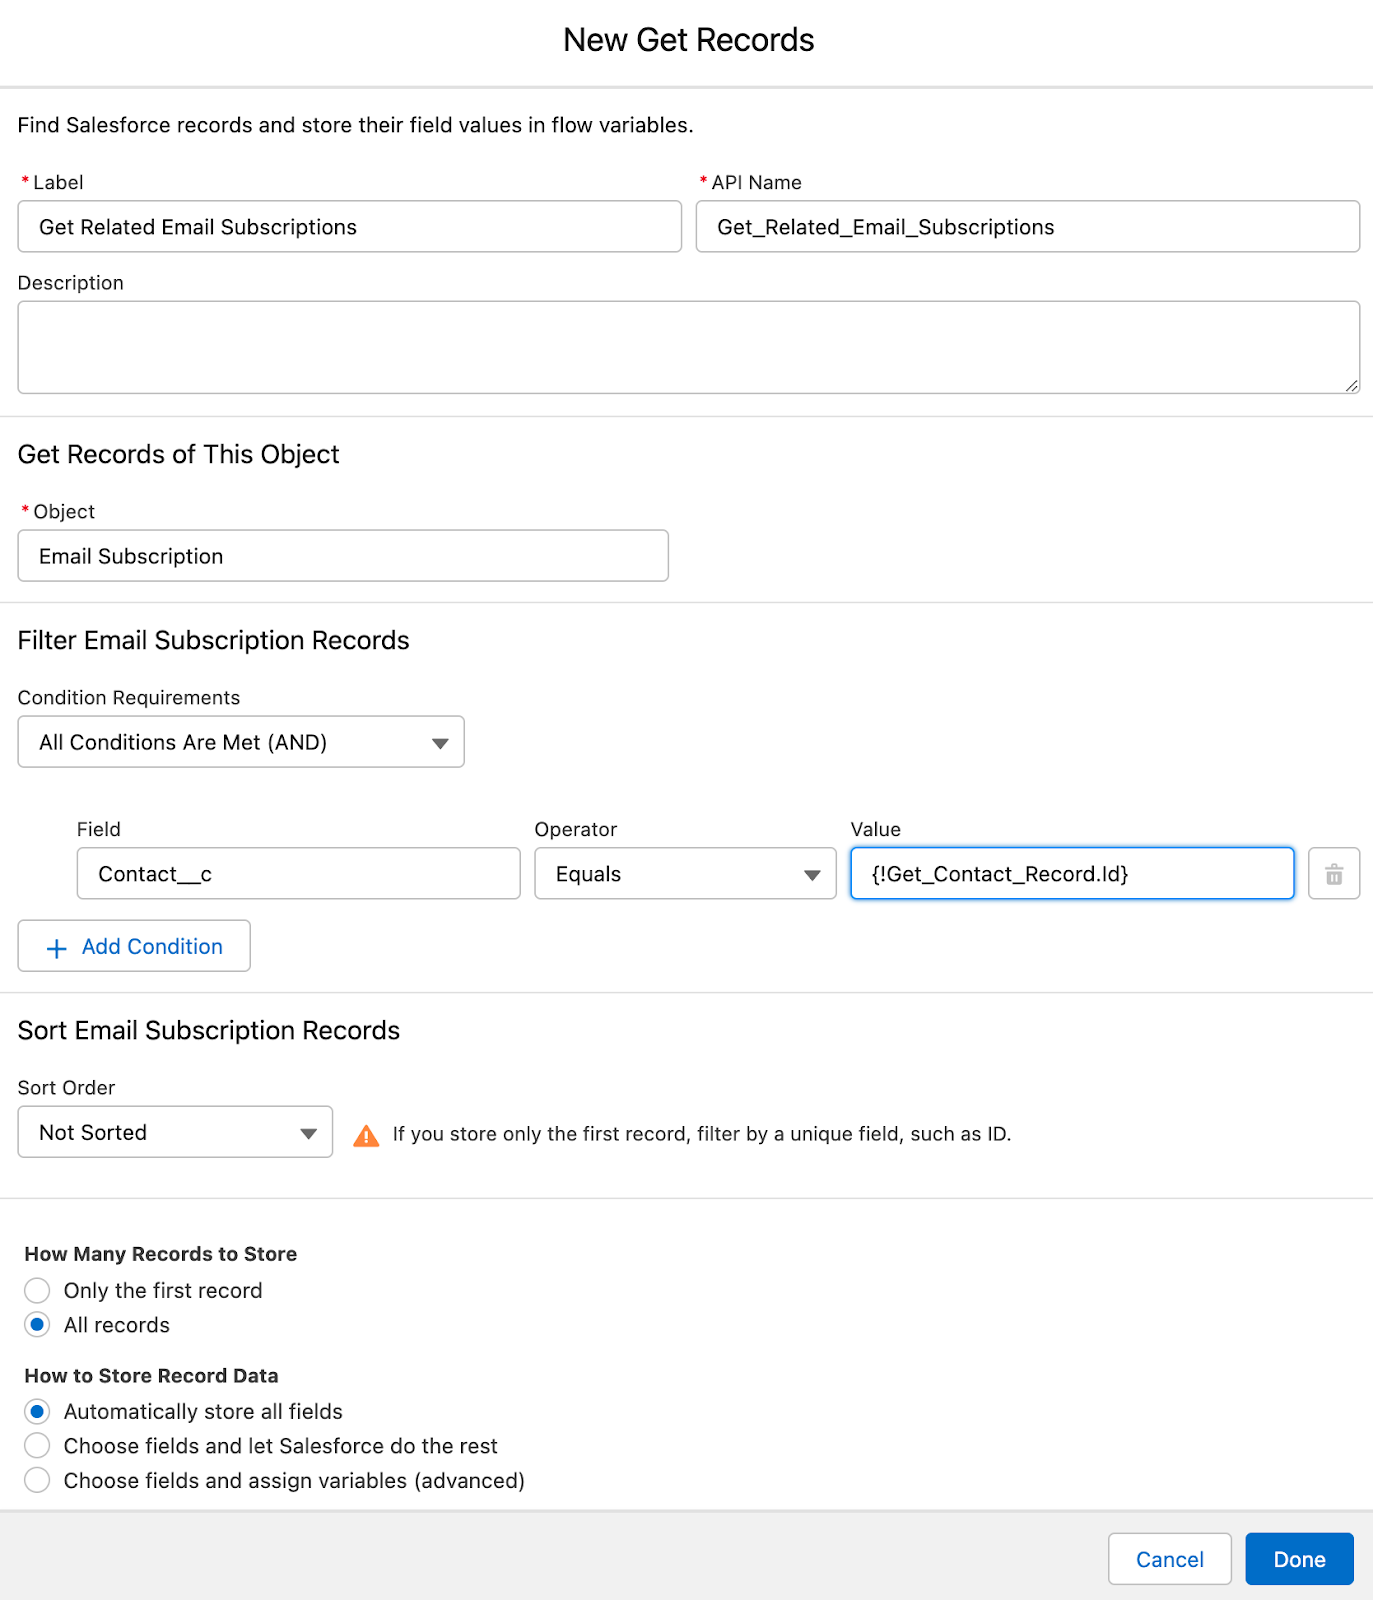 salesforce-flows-new-get-records-Id